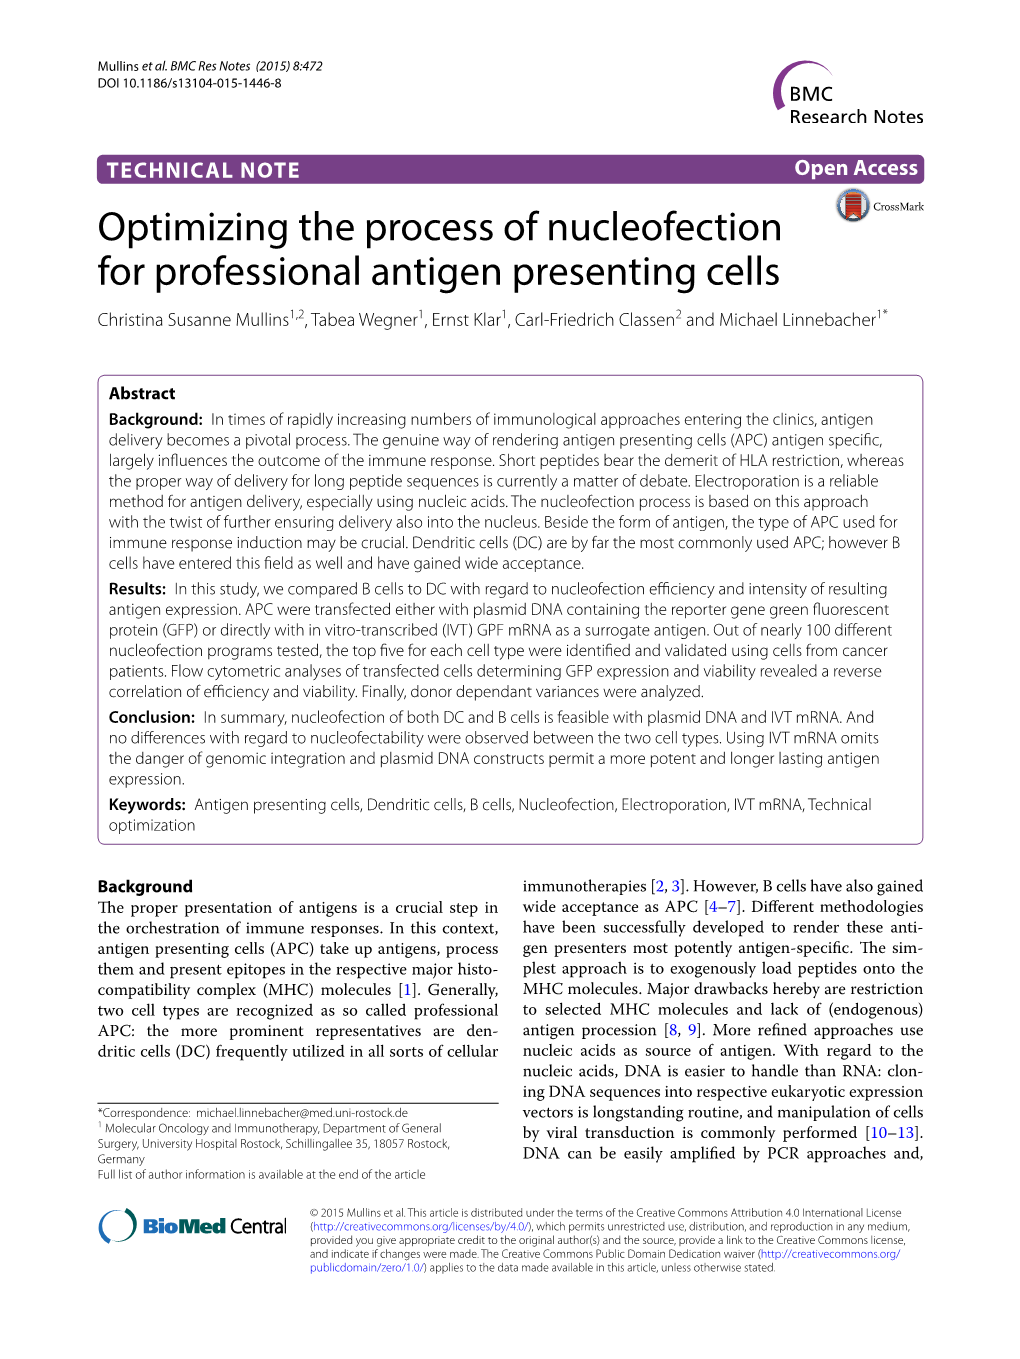 Optimizing the Process of Nucleofection for Professional